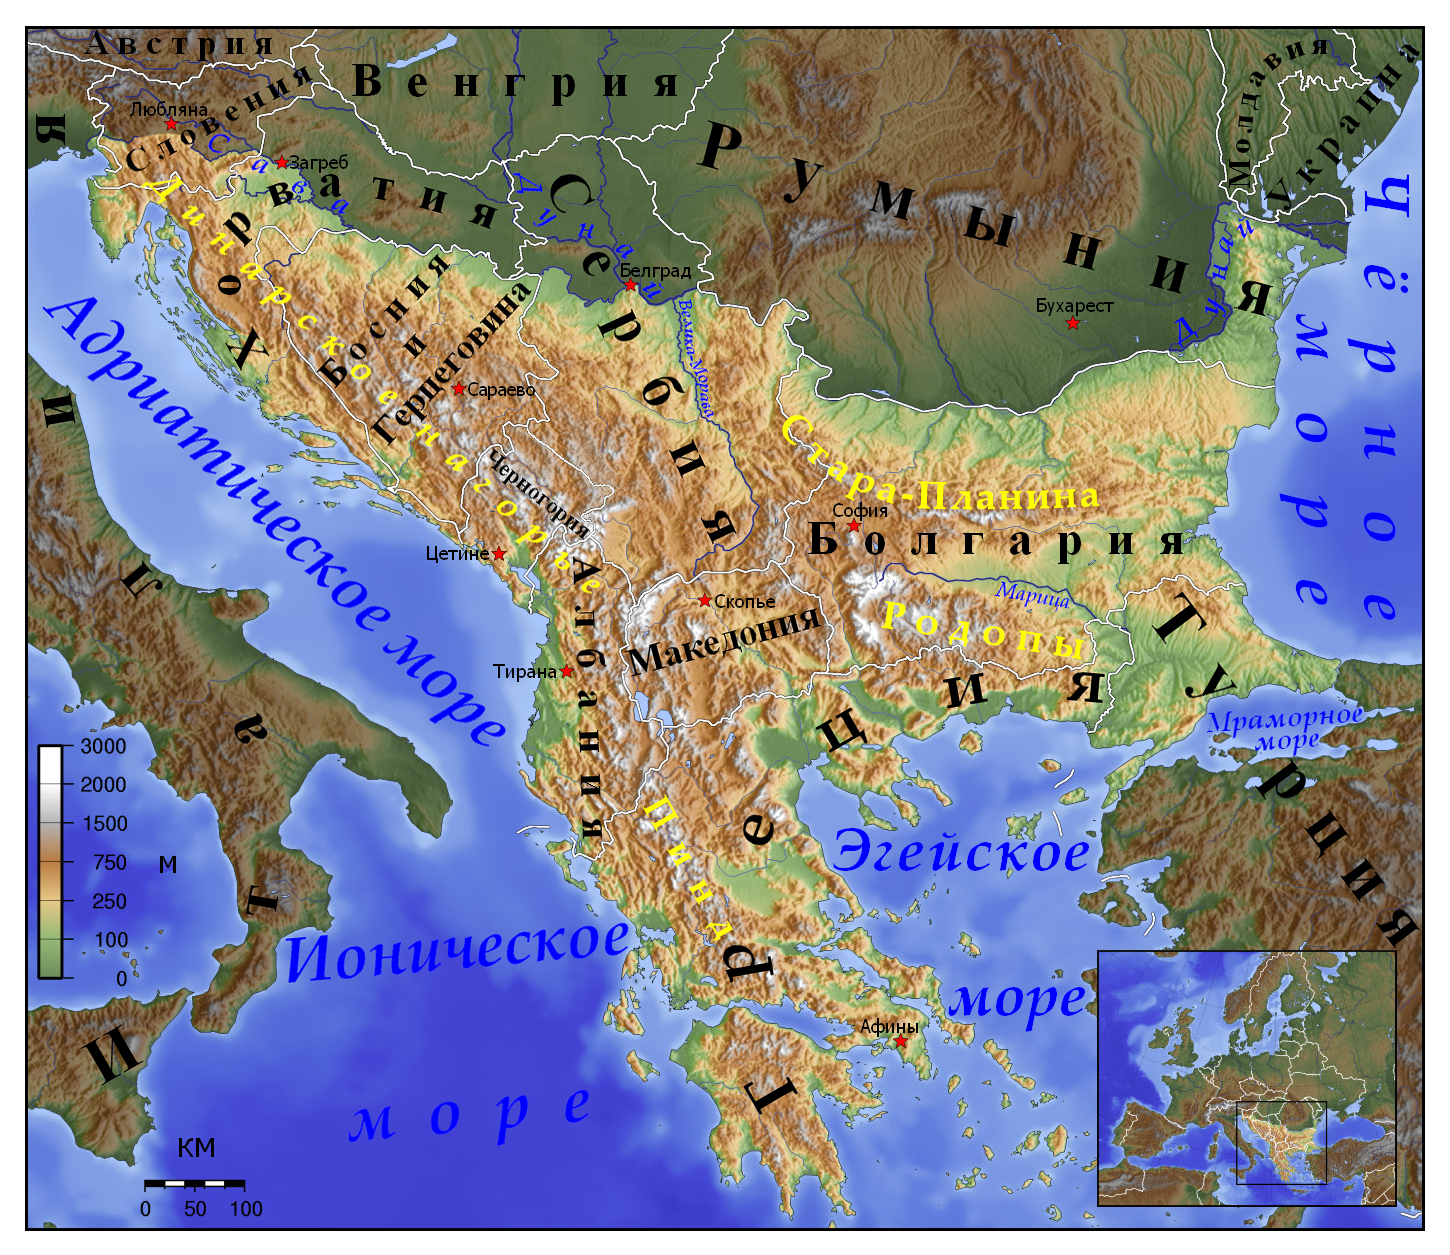 http://hrvatski-fokus.hr/wp-content/uploads/2020/01/large-physical-map-of-balkans-in-russian.jpg